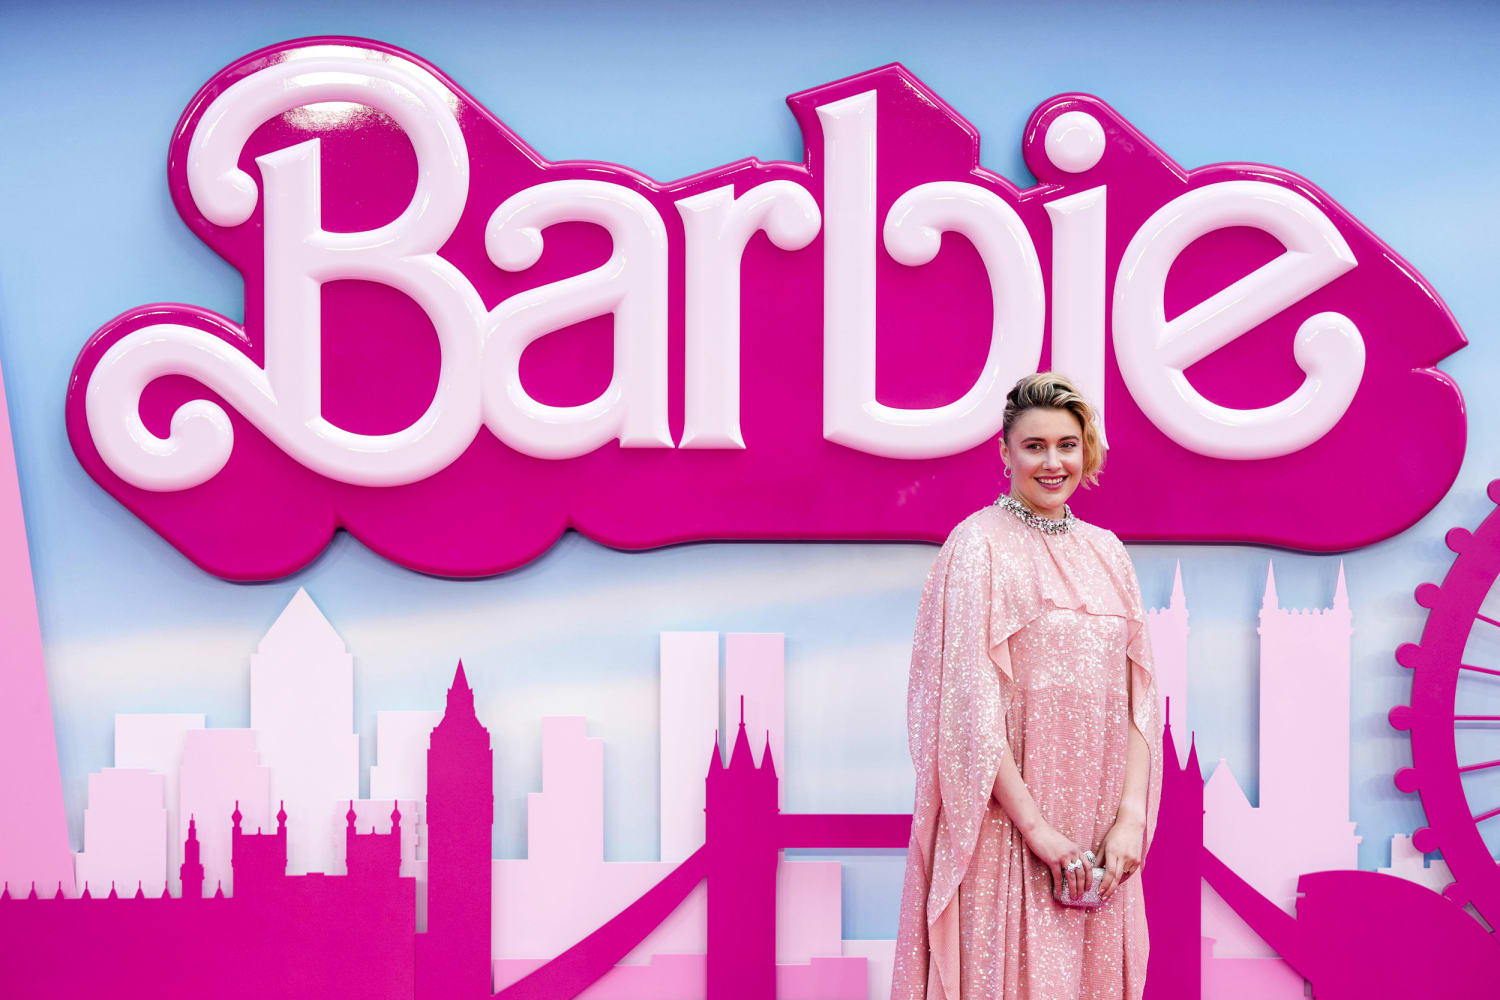 6 things to know about Barbie as the new film sets box office records